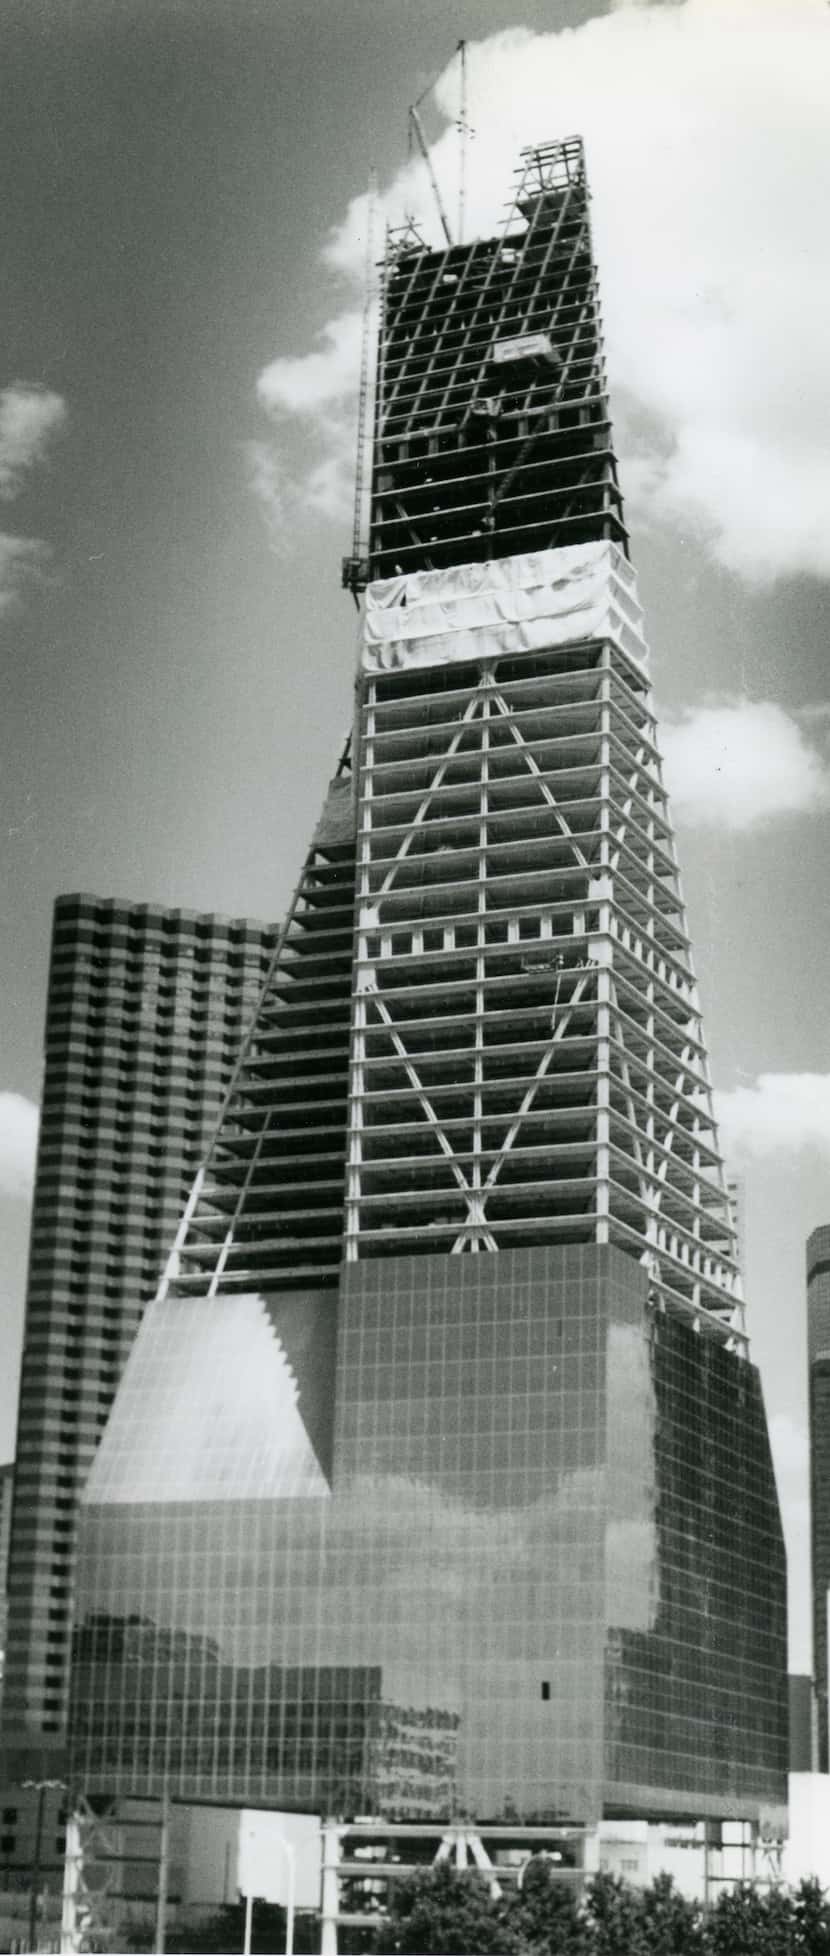 Fountain Place under construction in July 1985.